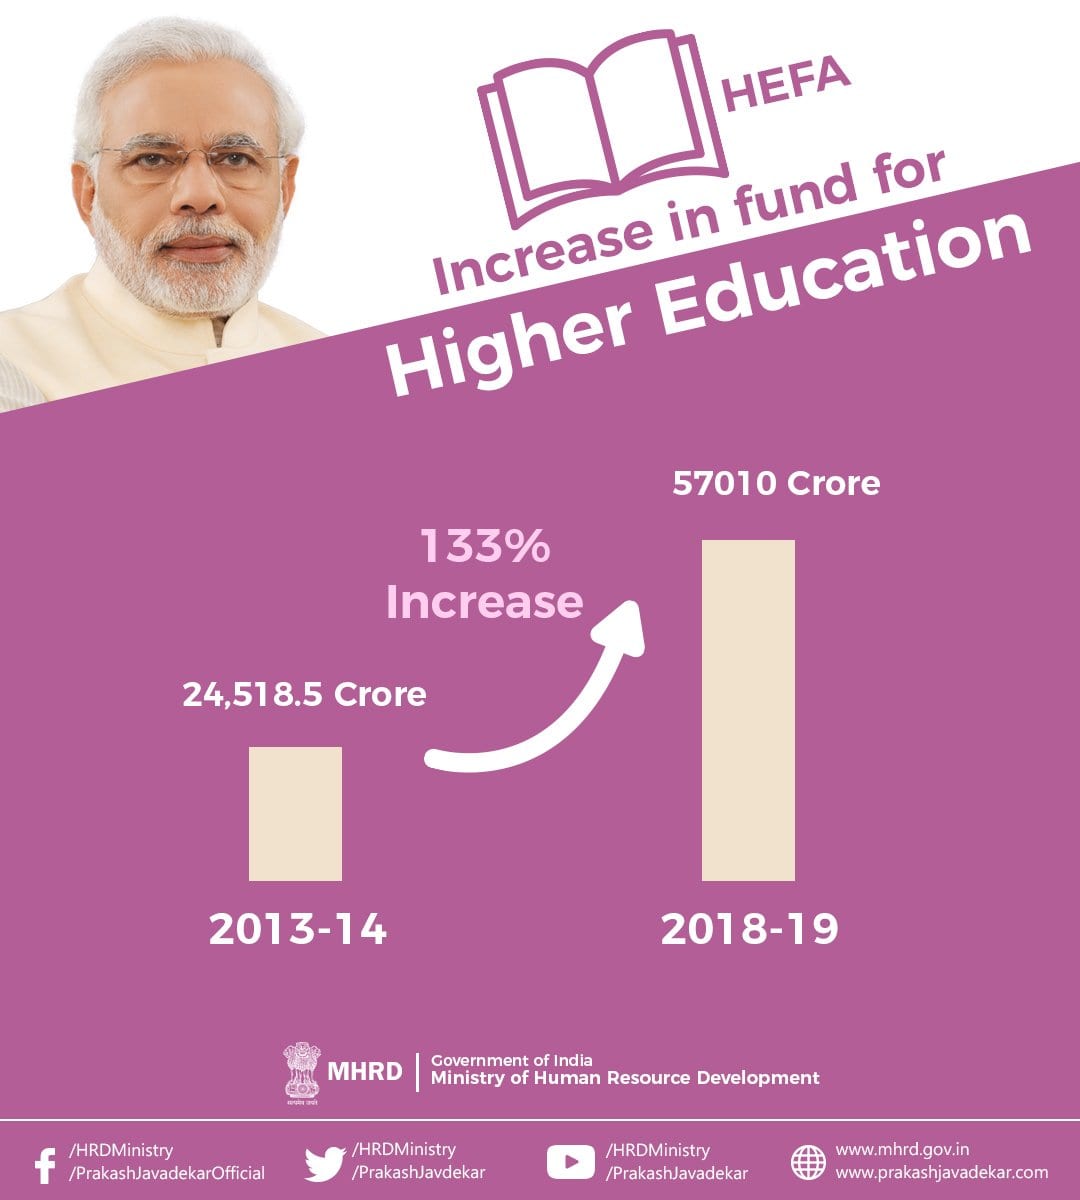 Cabinet approves funds to boost educational infrastructure: Revitalising Infrastructure and Systems in Higher Education (RISE) by 2022